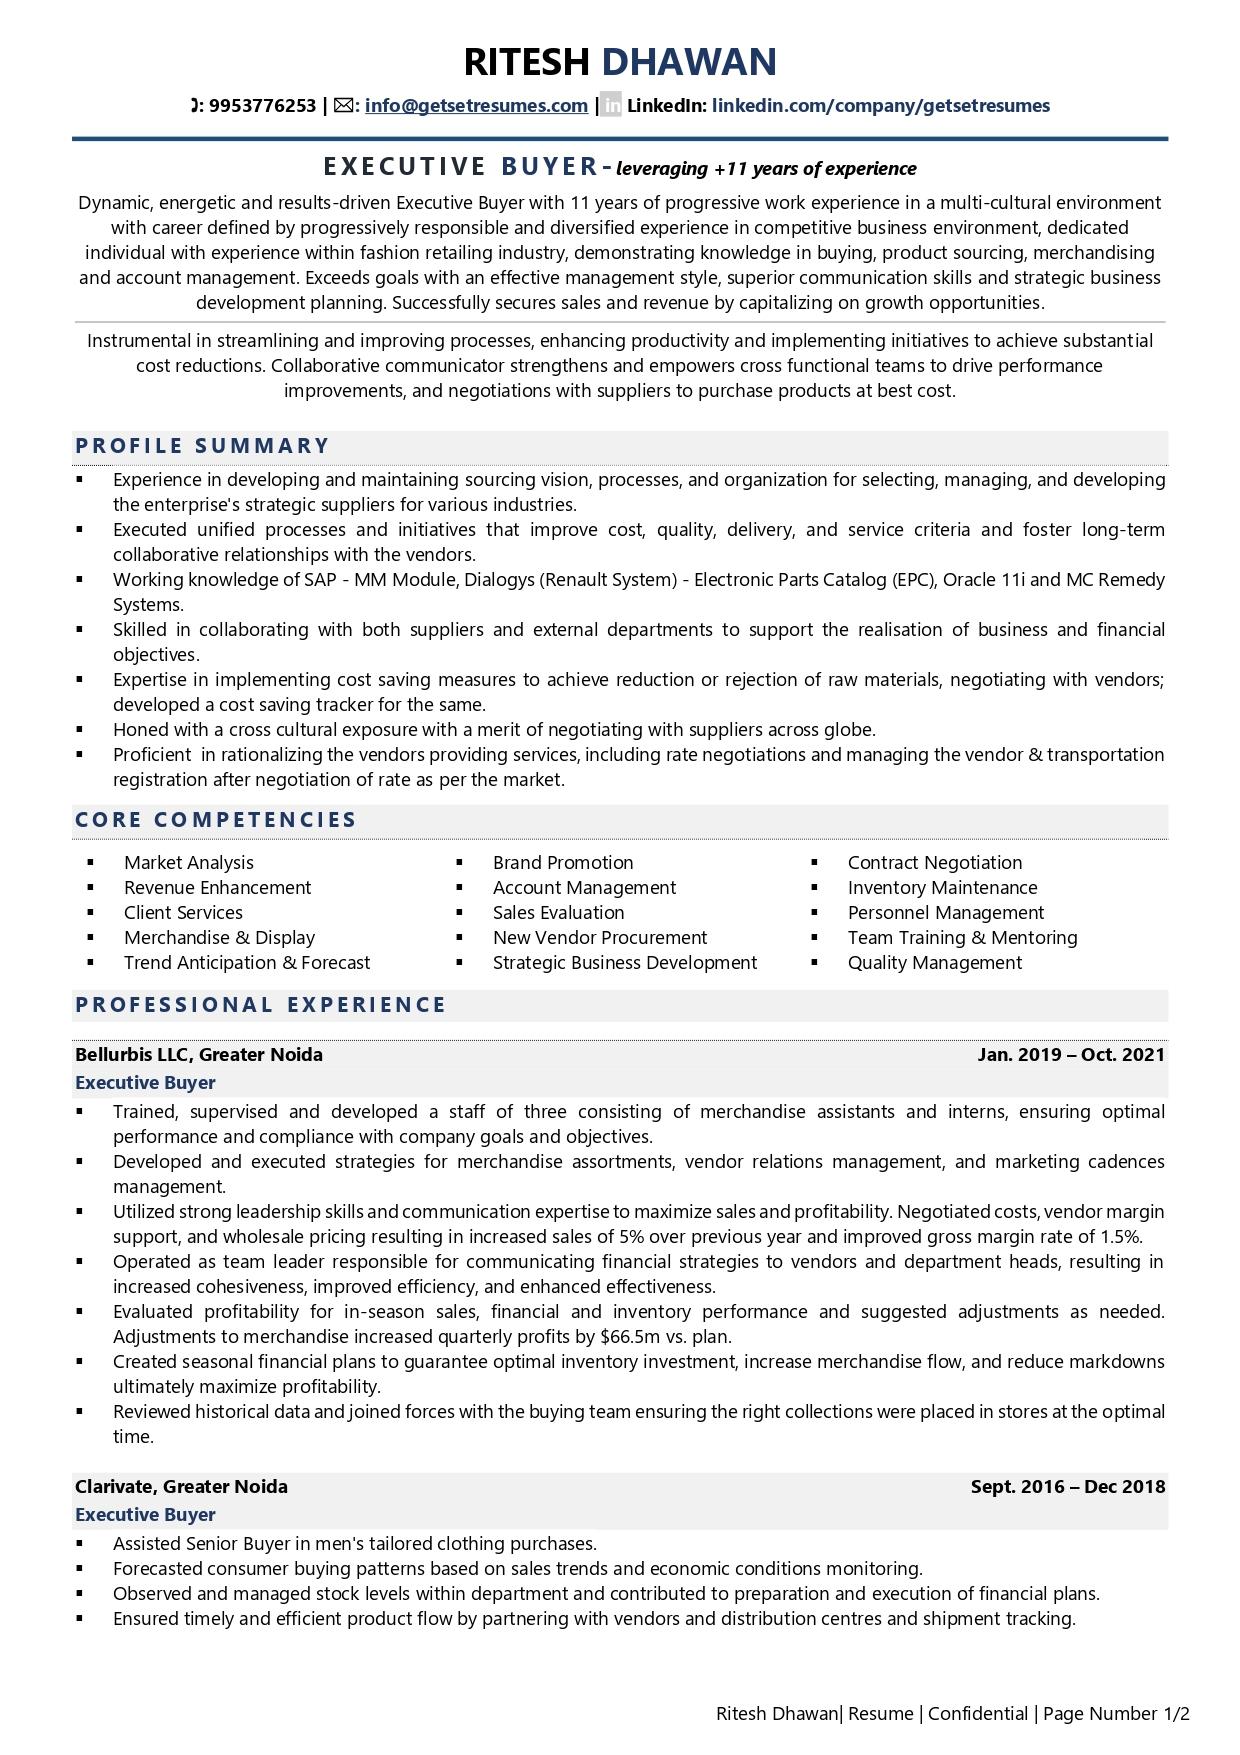 Executive Buyer Resume Examples & Template (with job winning tips)